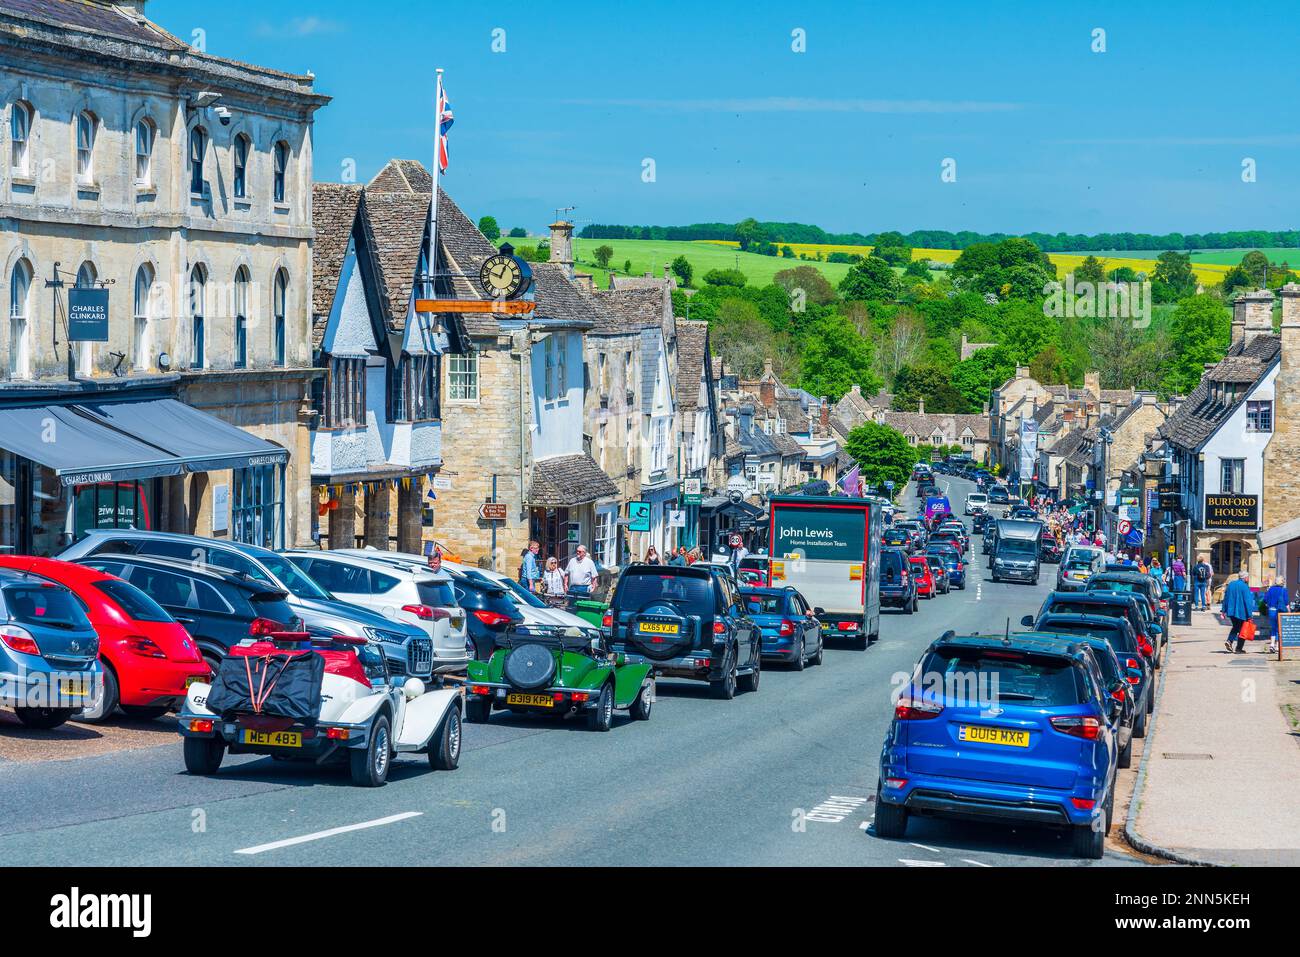 Burford, Cotswolds, Gloucestershire, Angleterre, Royaume-Uni, Europe Banque D'Images